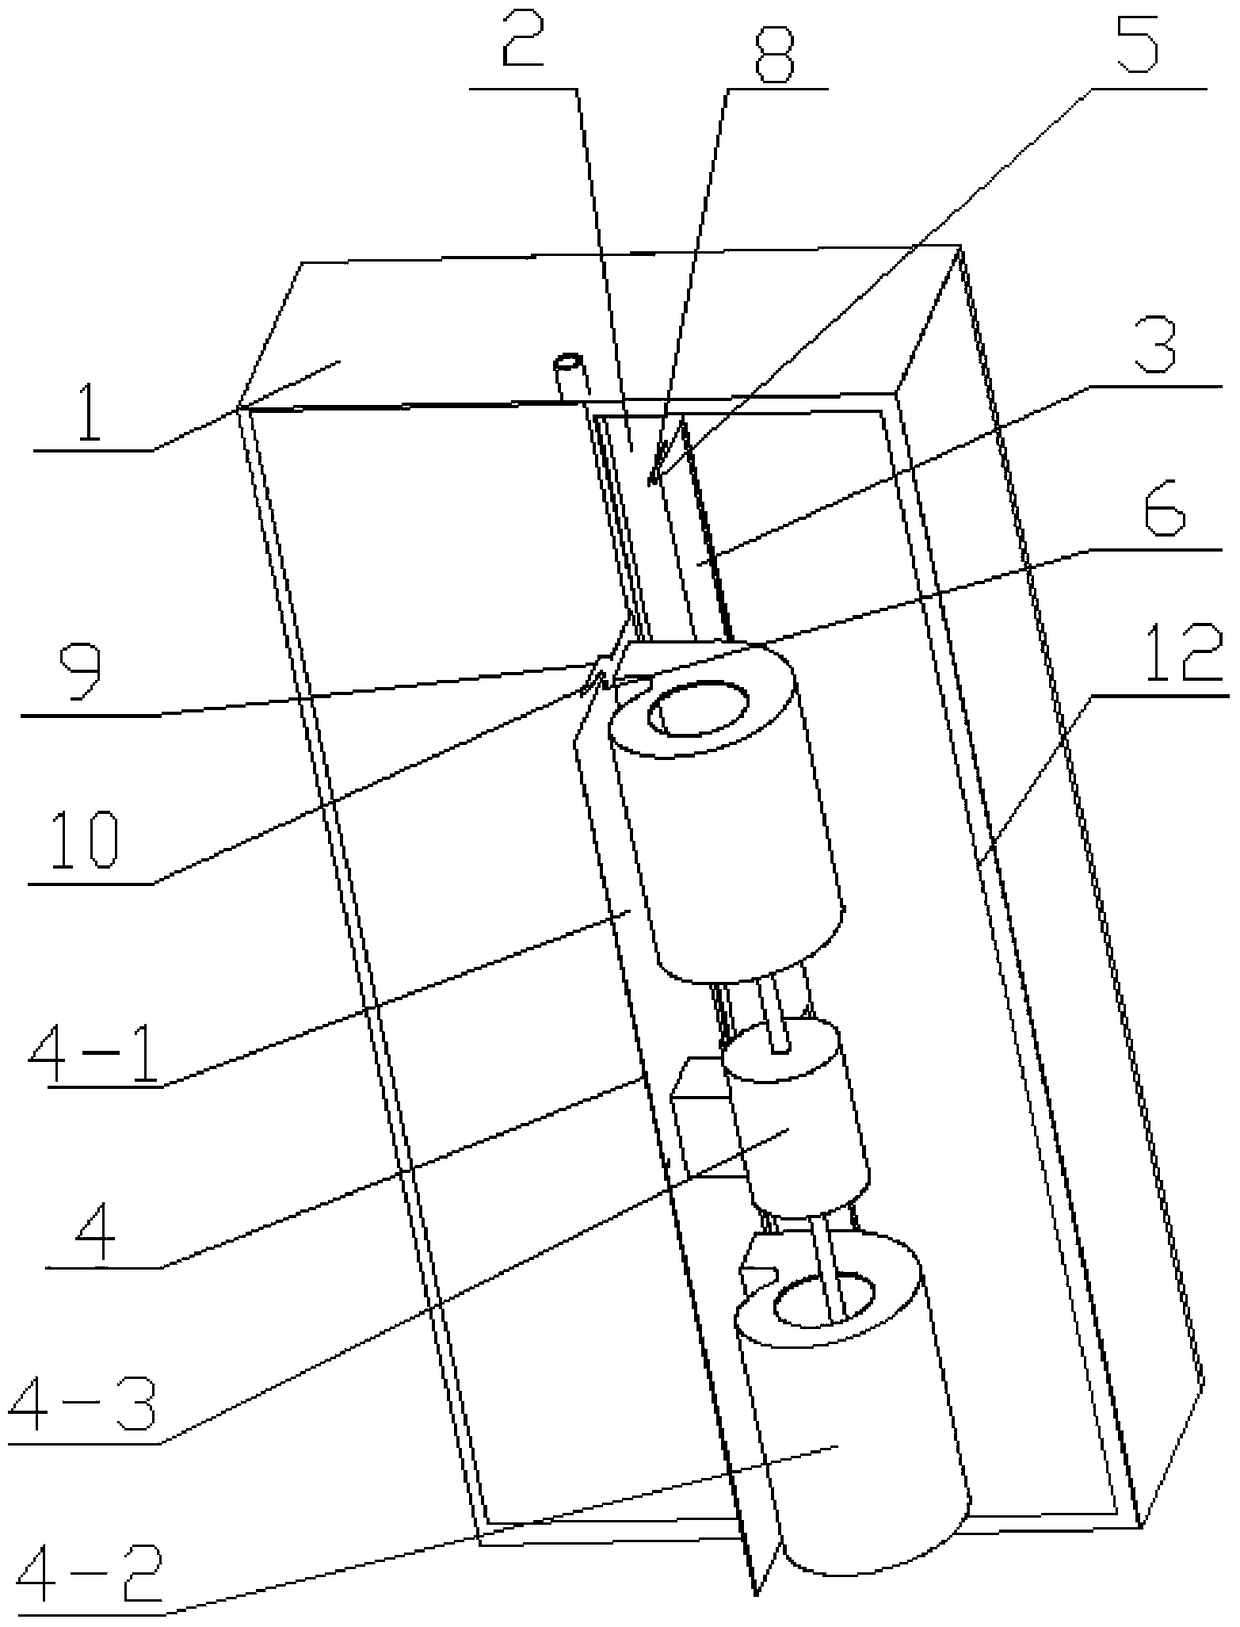 A duct machine with a detachable partition assembly